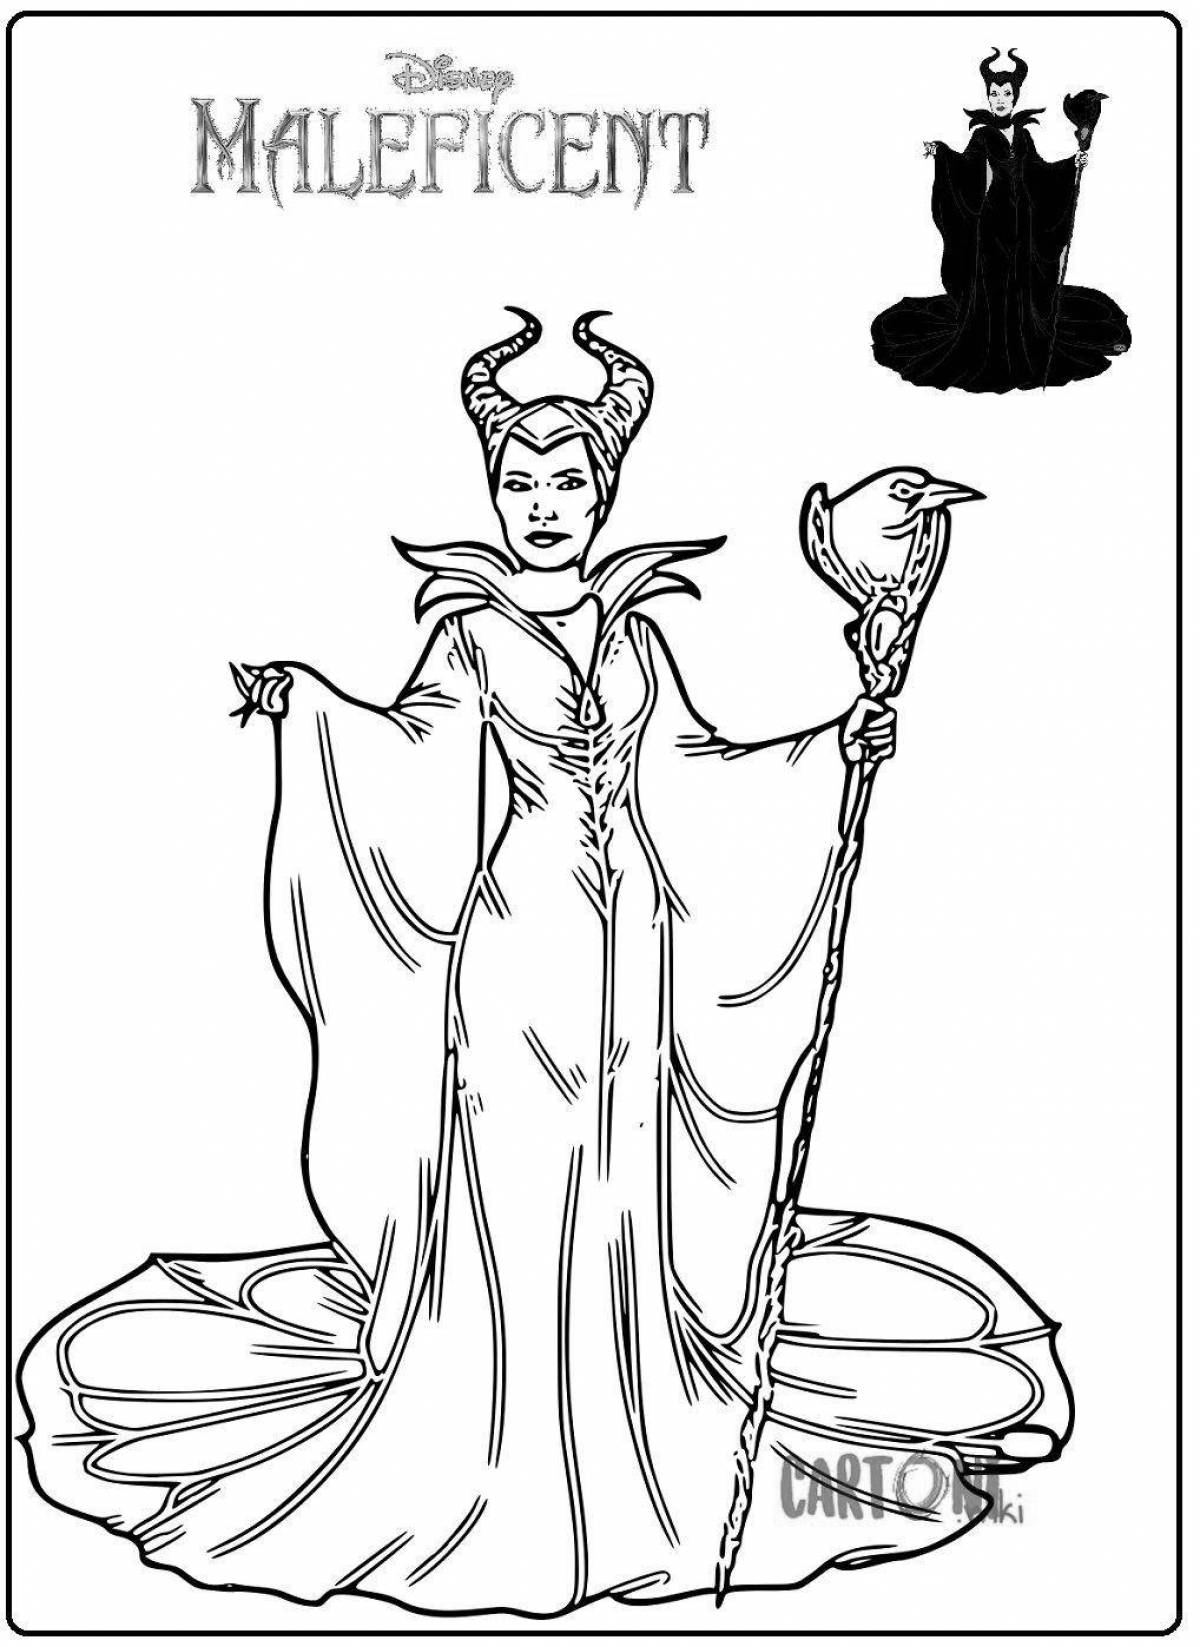 Great maleficent coloring book for kids